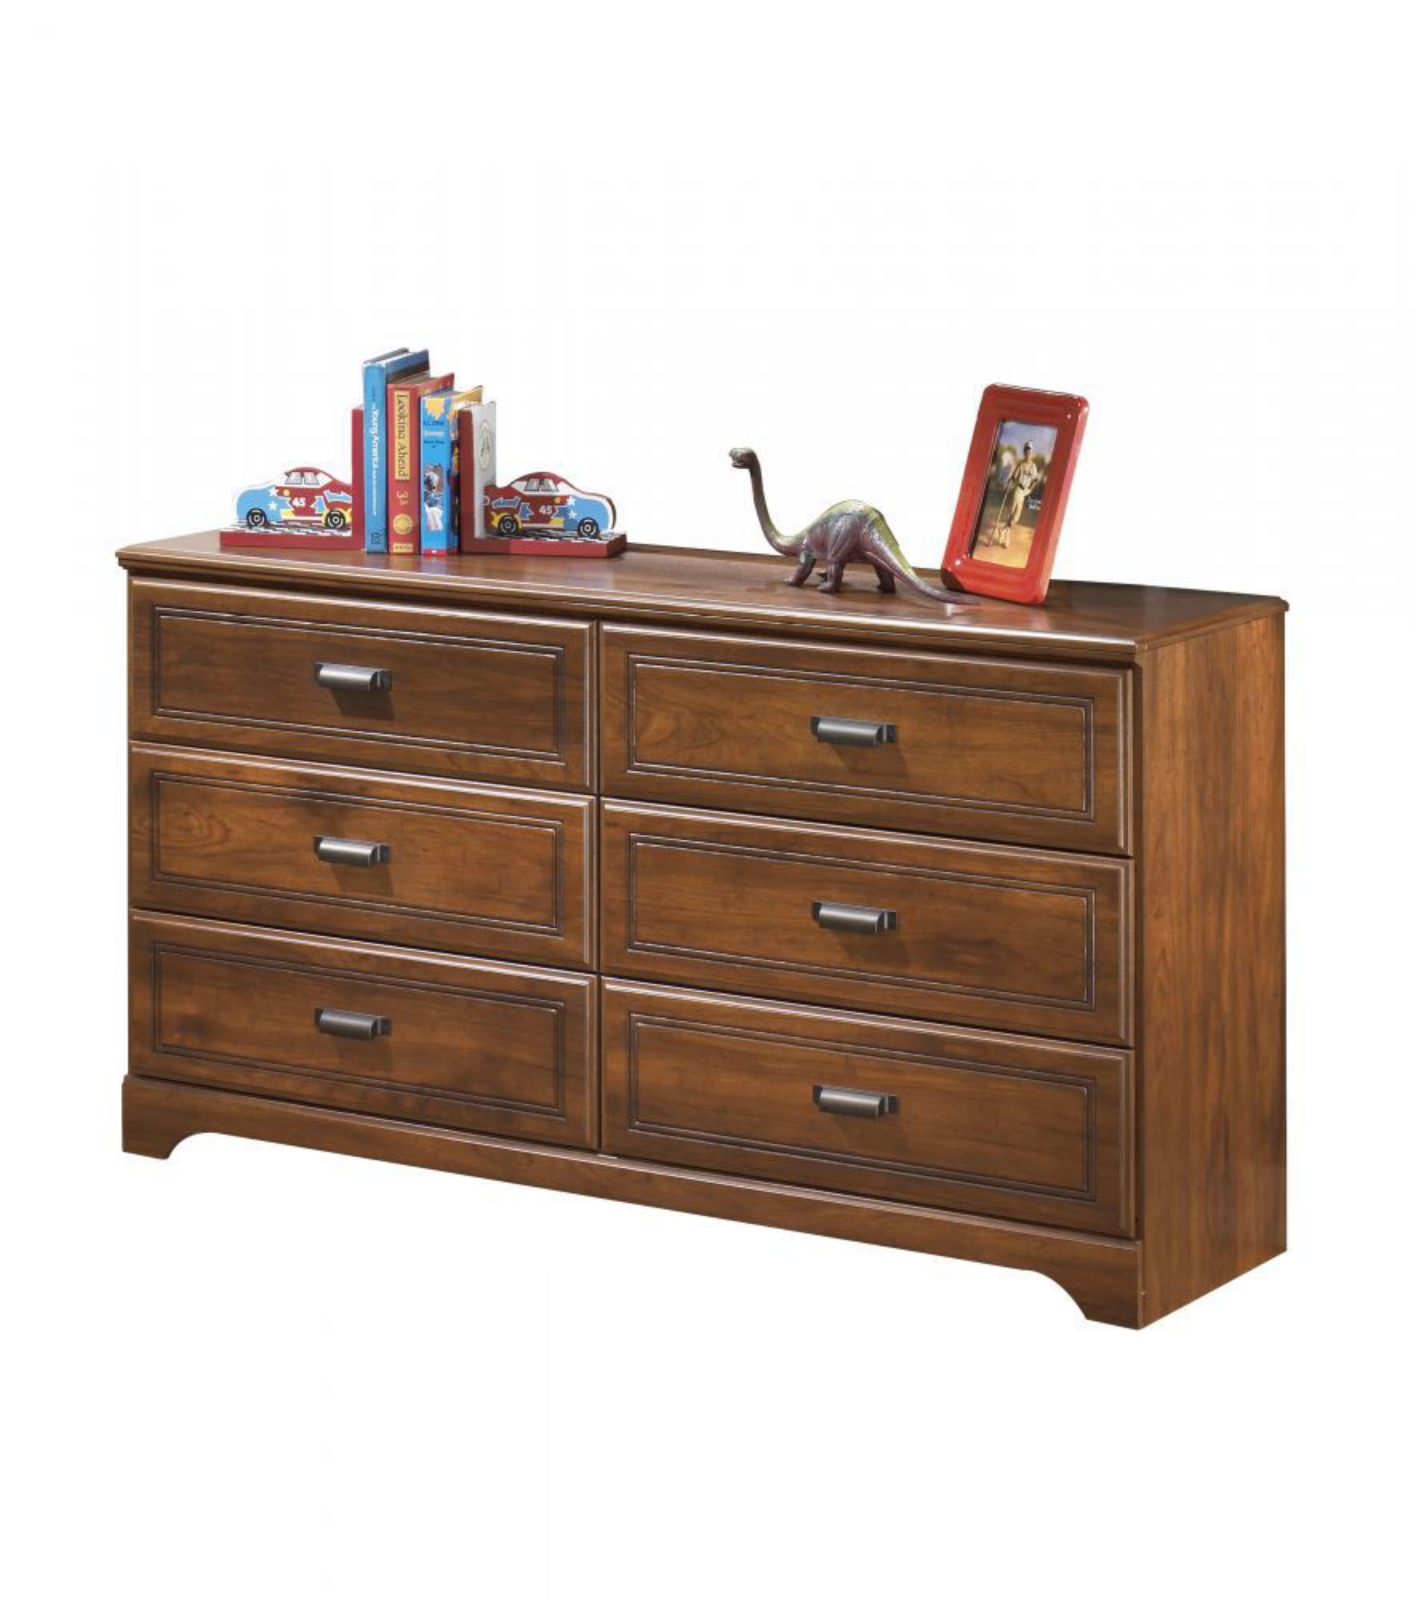 Picture of Barchan Dresser